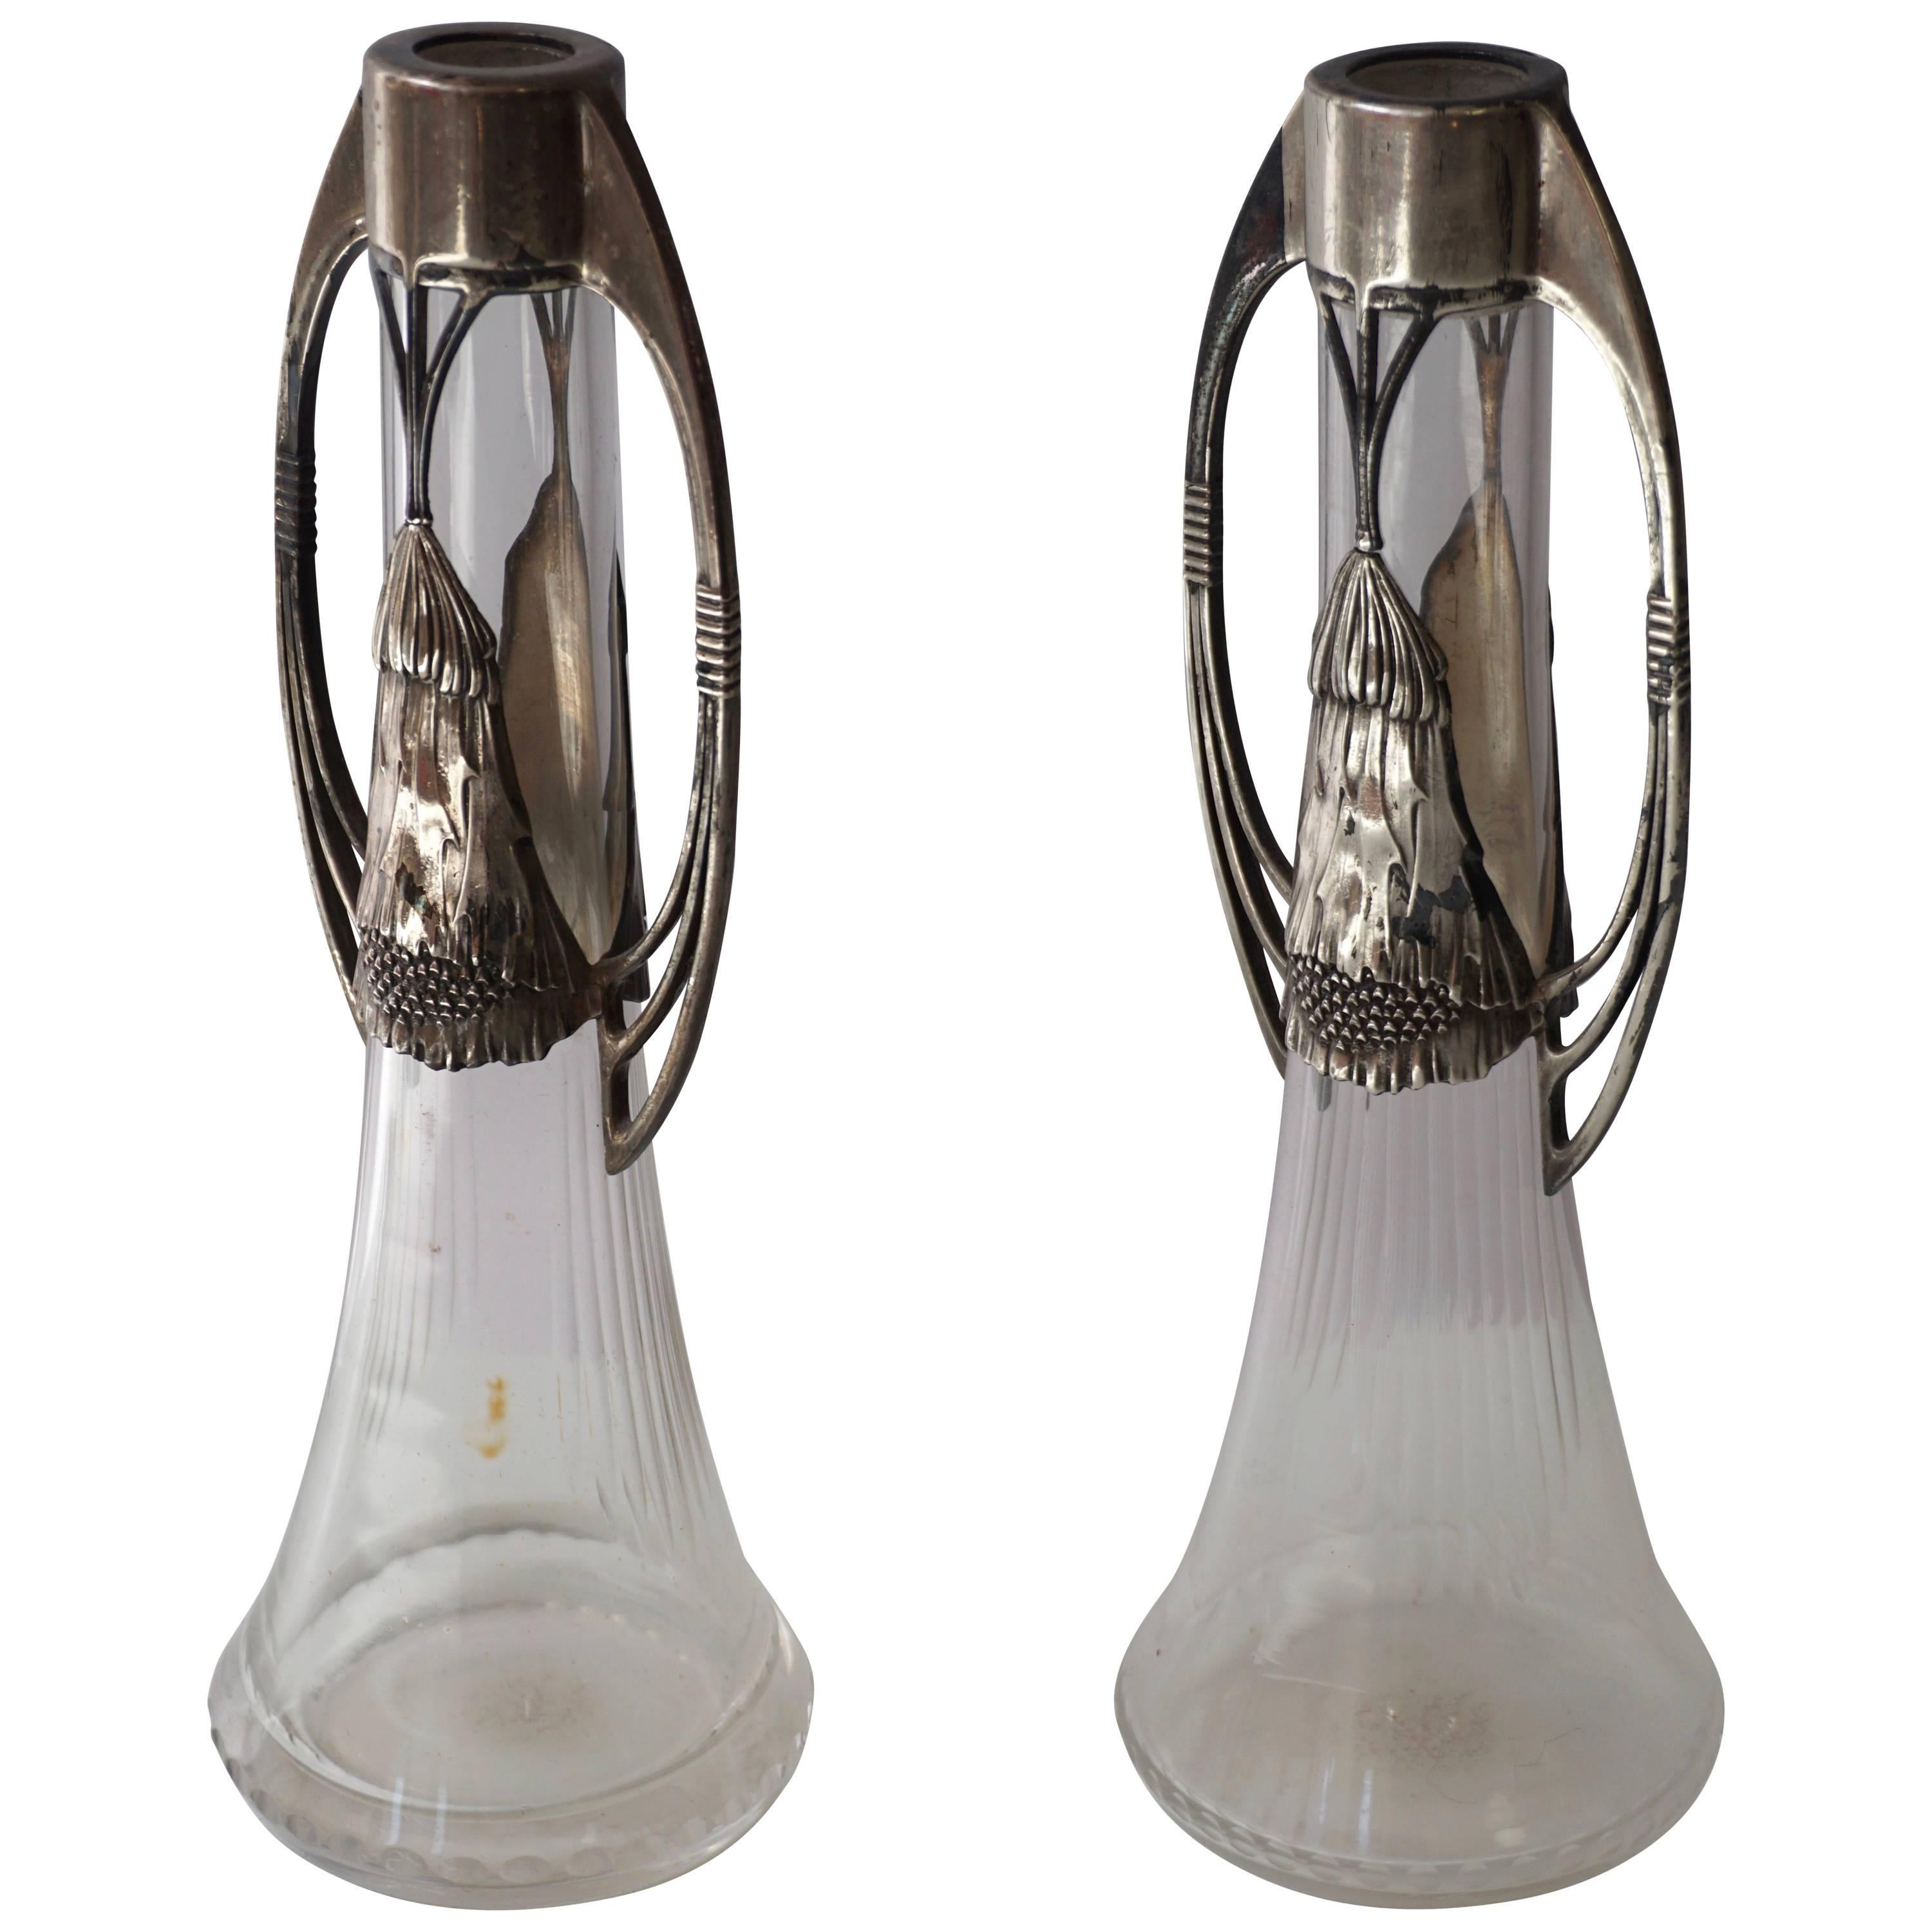 Pair of WMF Art Nouveau Silver Plated Vases